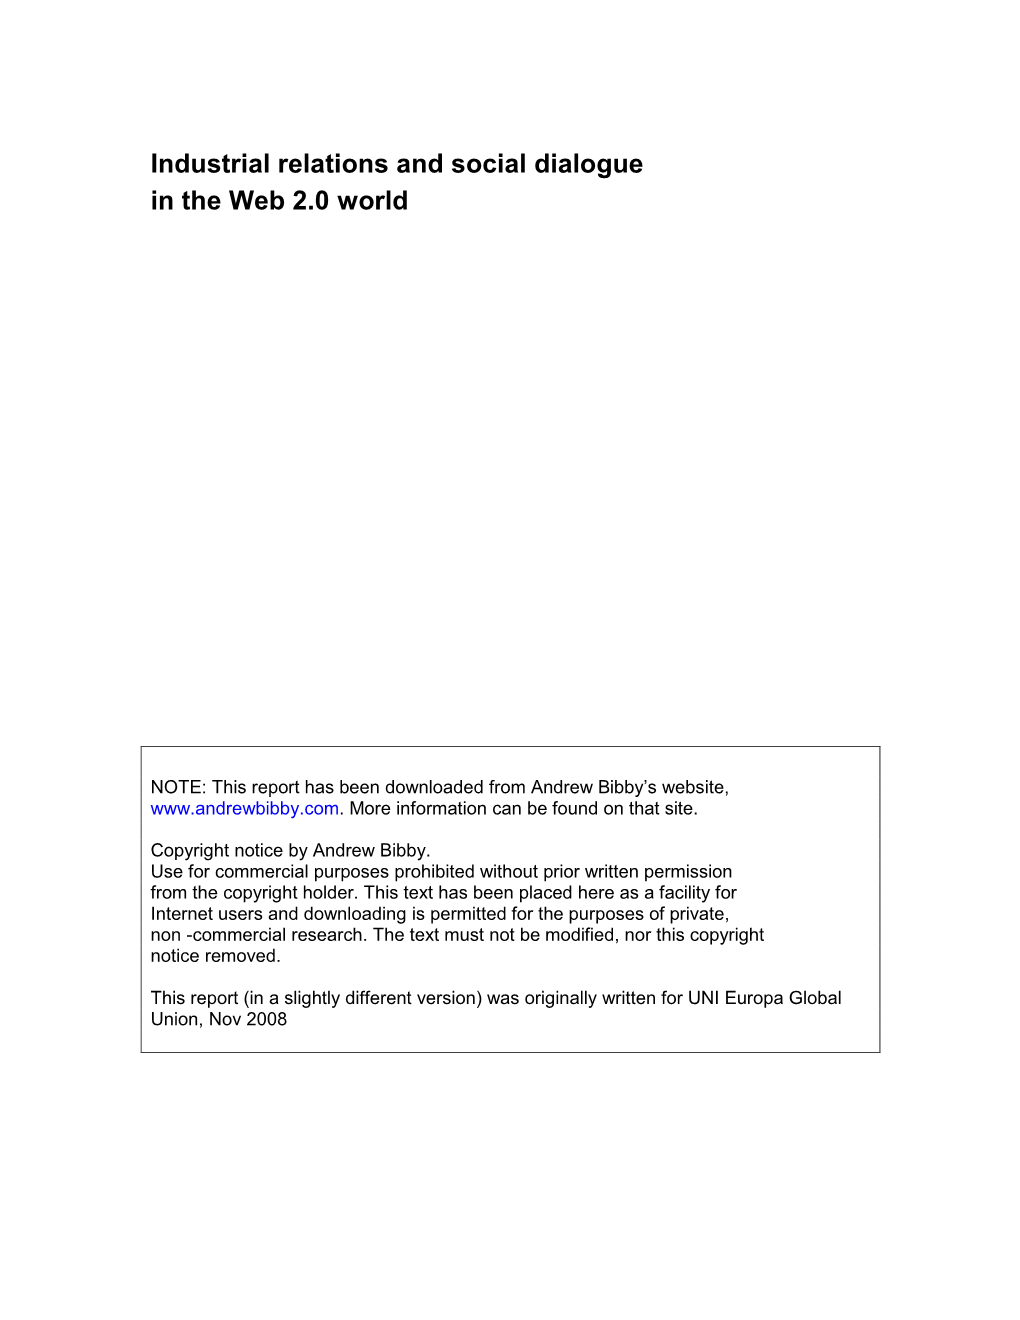 Industrial Relations and Social Dialogue in the Web 2.0 World